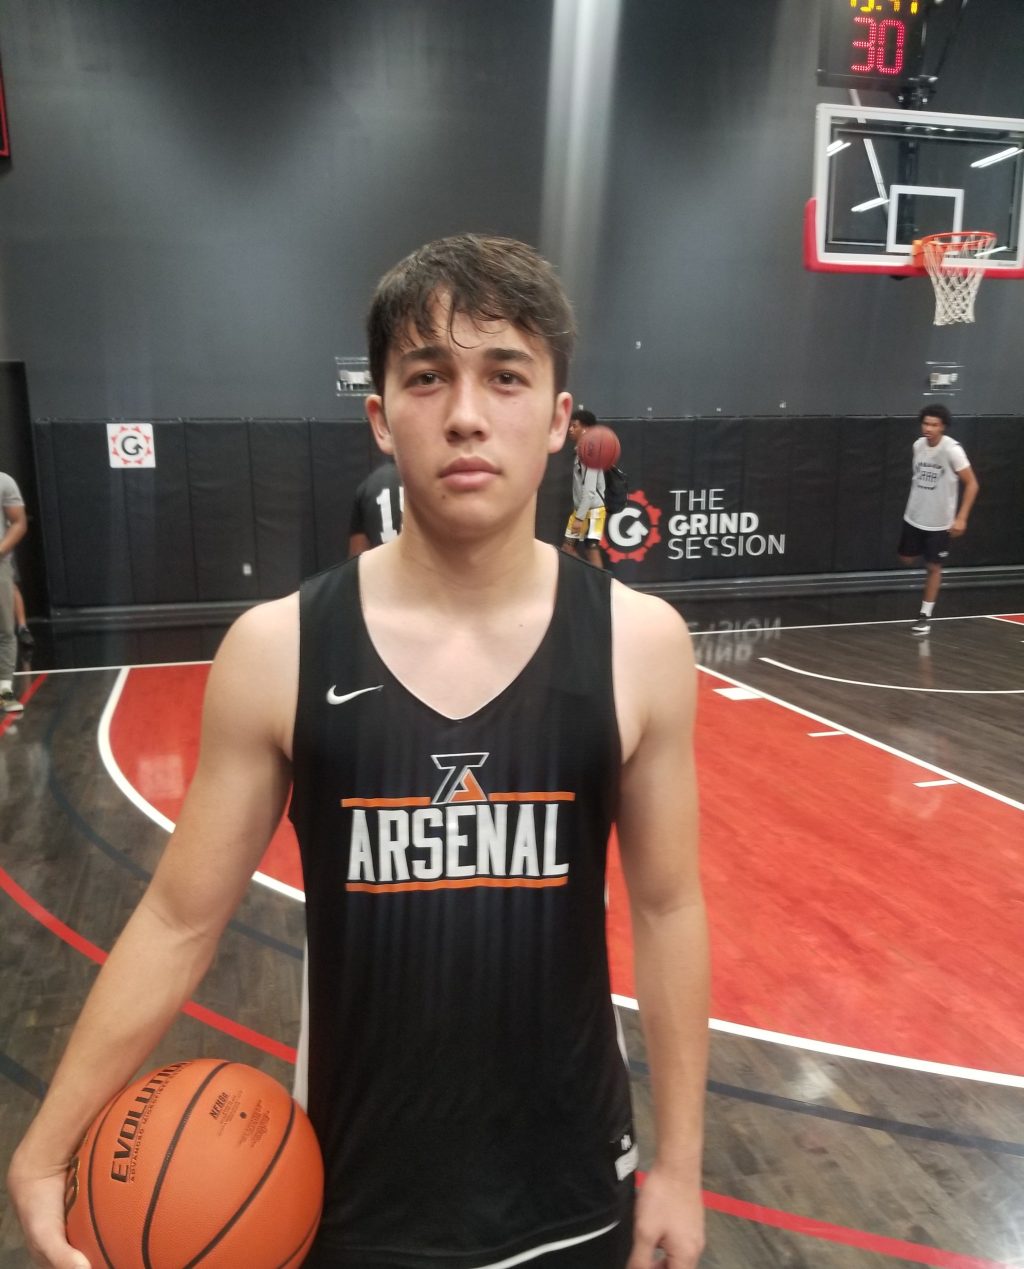 New Comers to the NorCal 2021 Rankings